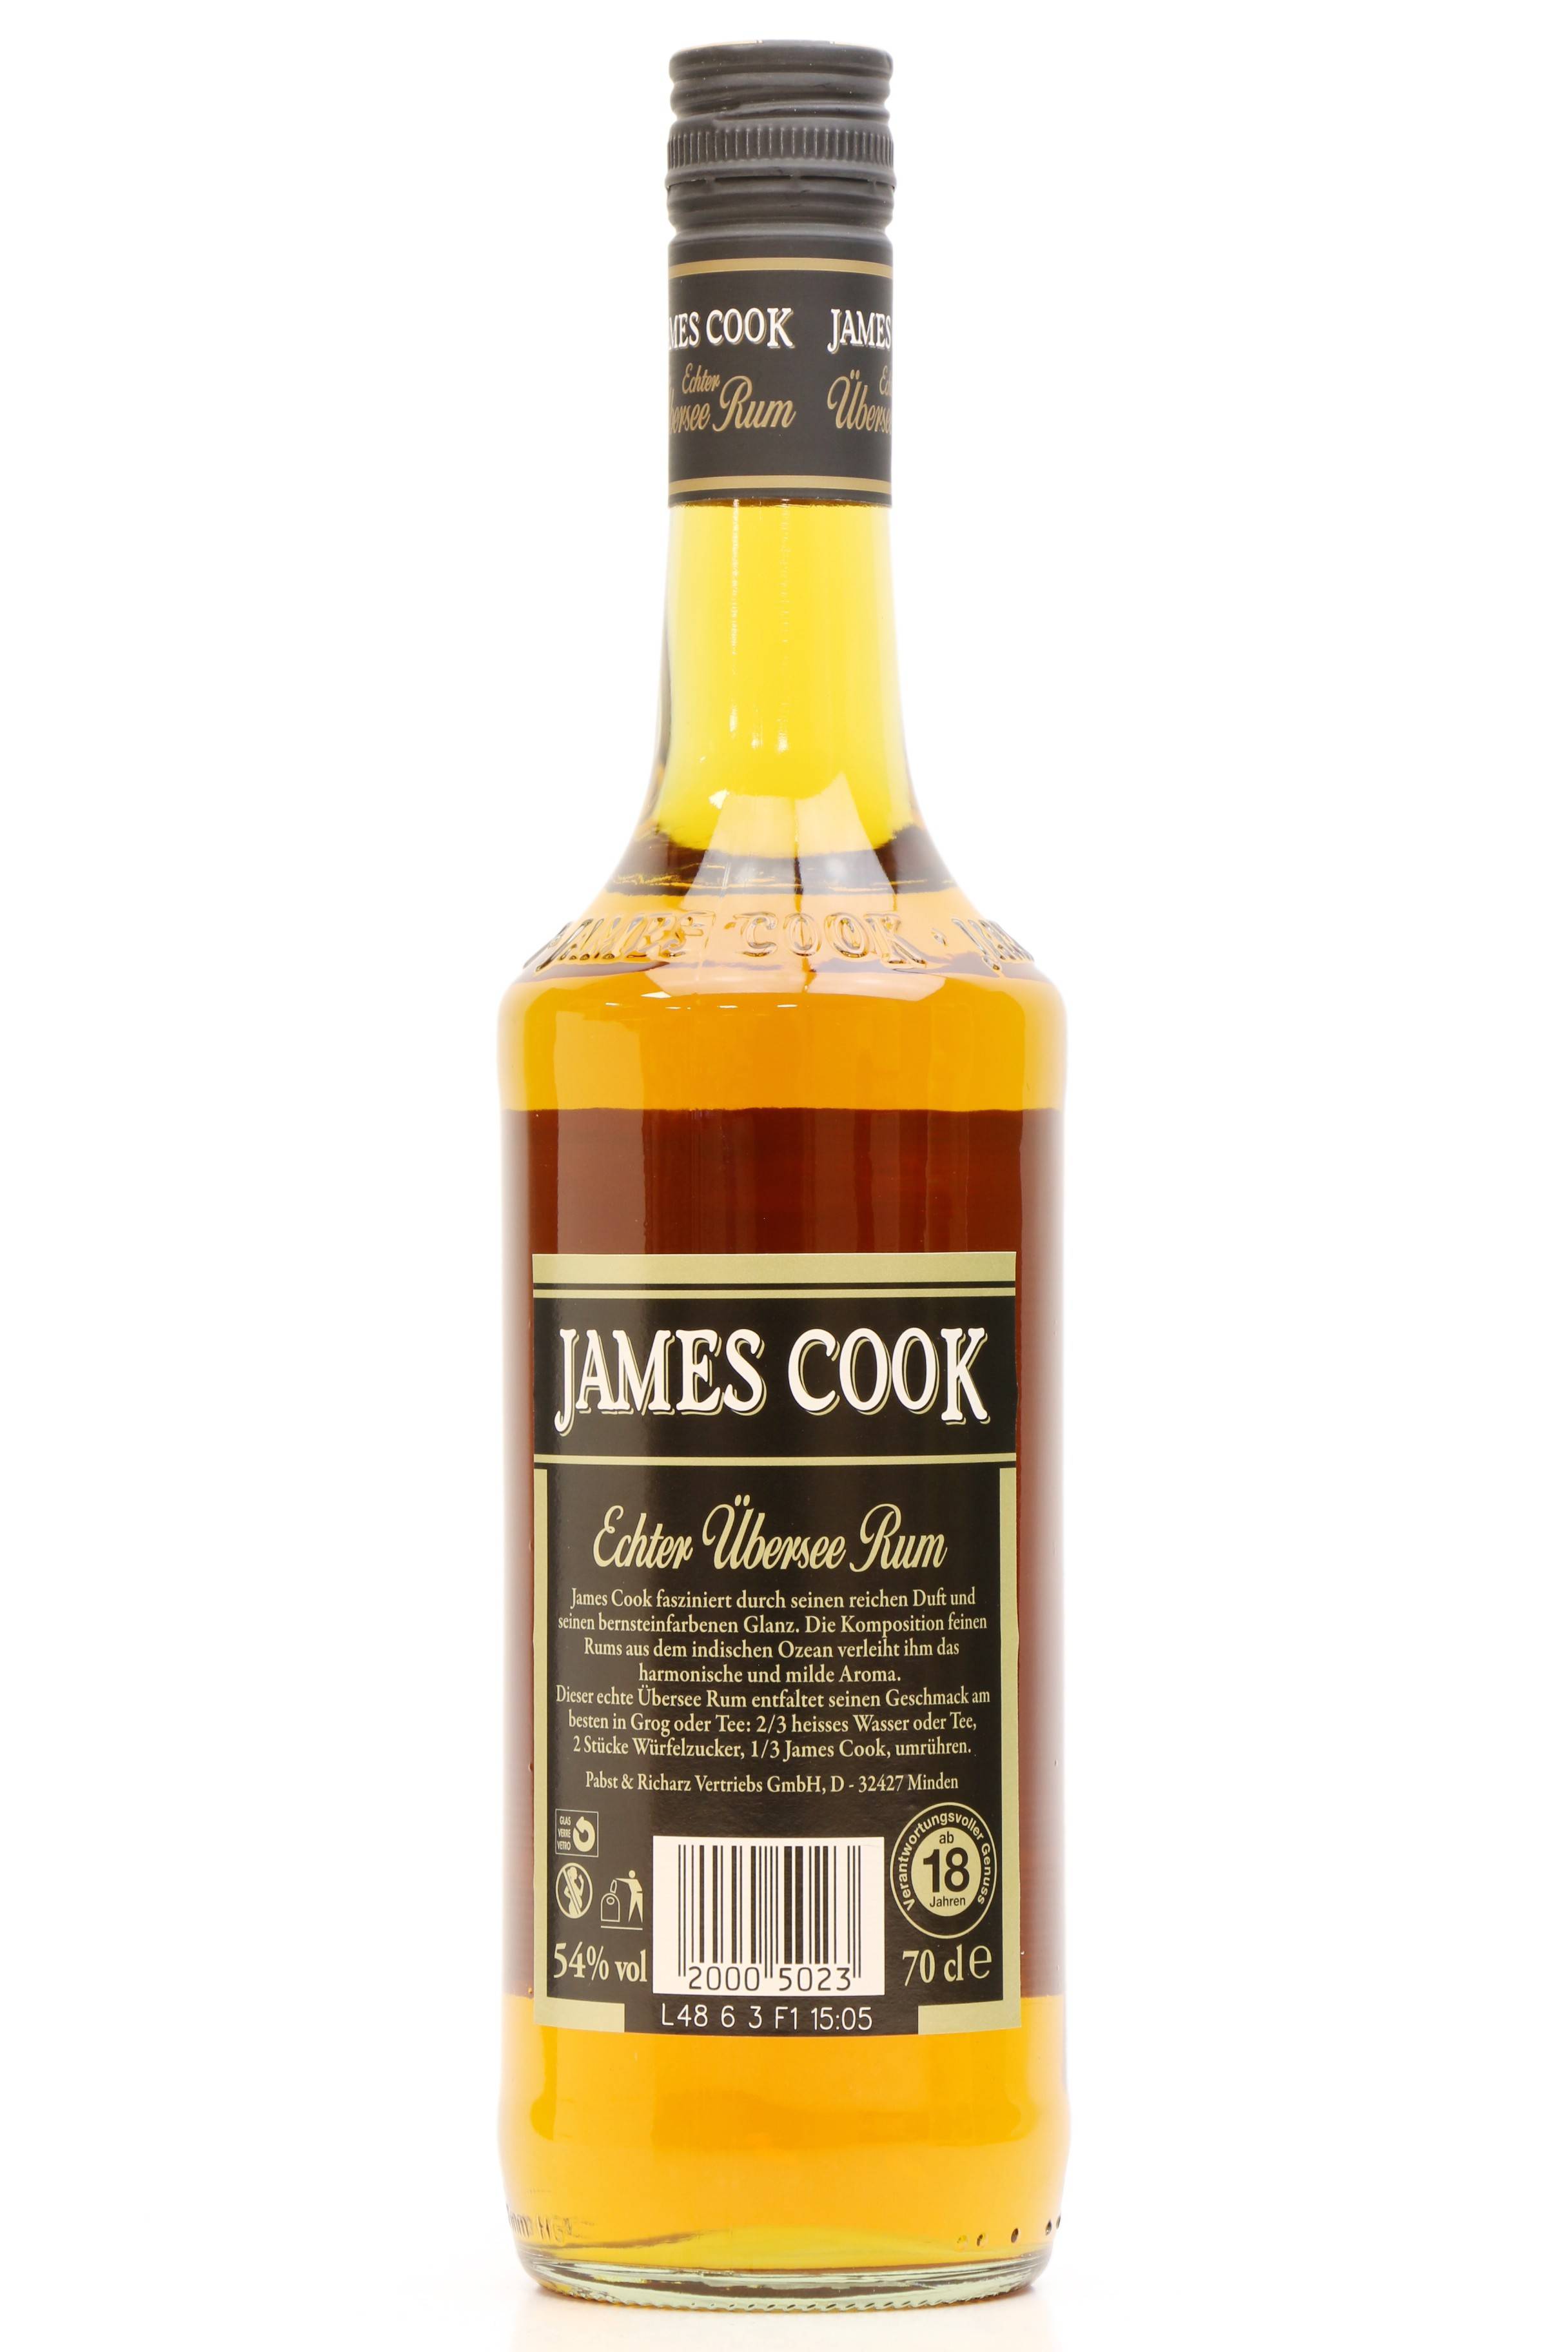 James Cook Echter Ubersee Rum (54%) Just Whisky - Auctions